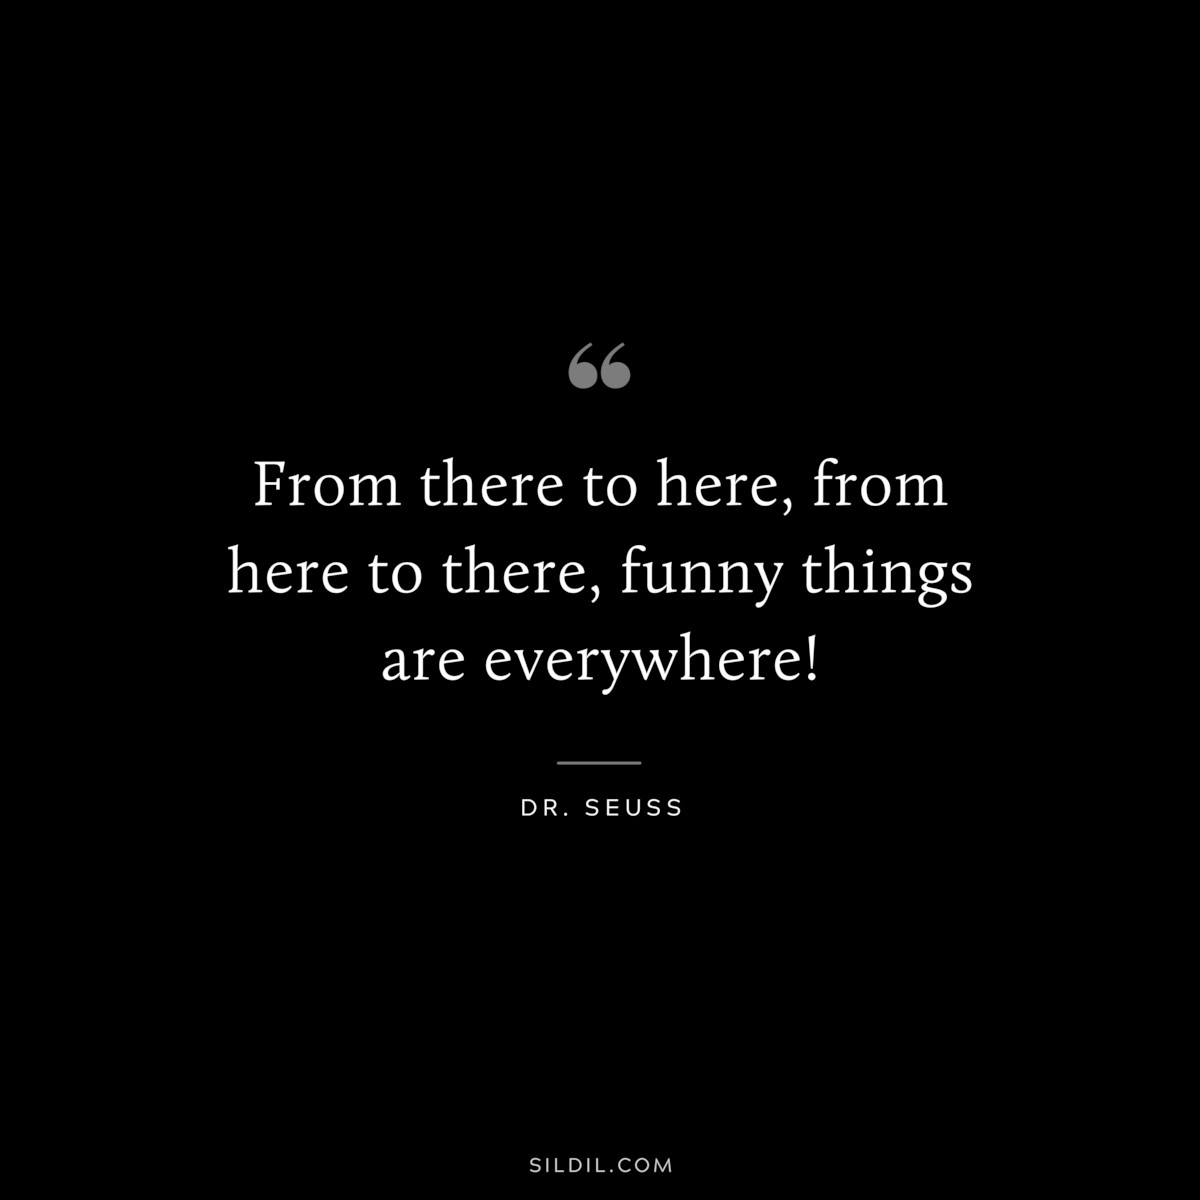 From there to here, from here to there, funny things are everywhere! ― Dr. Seuss